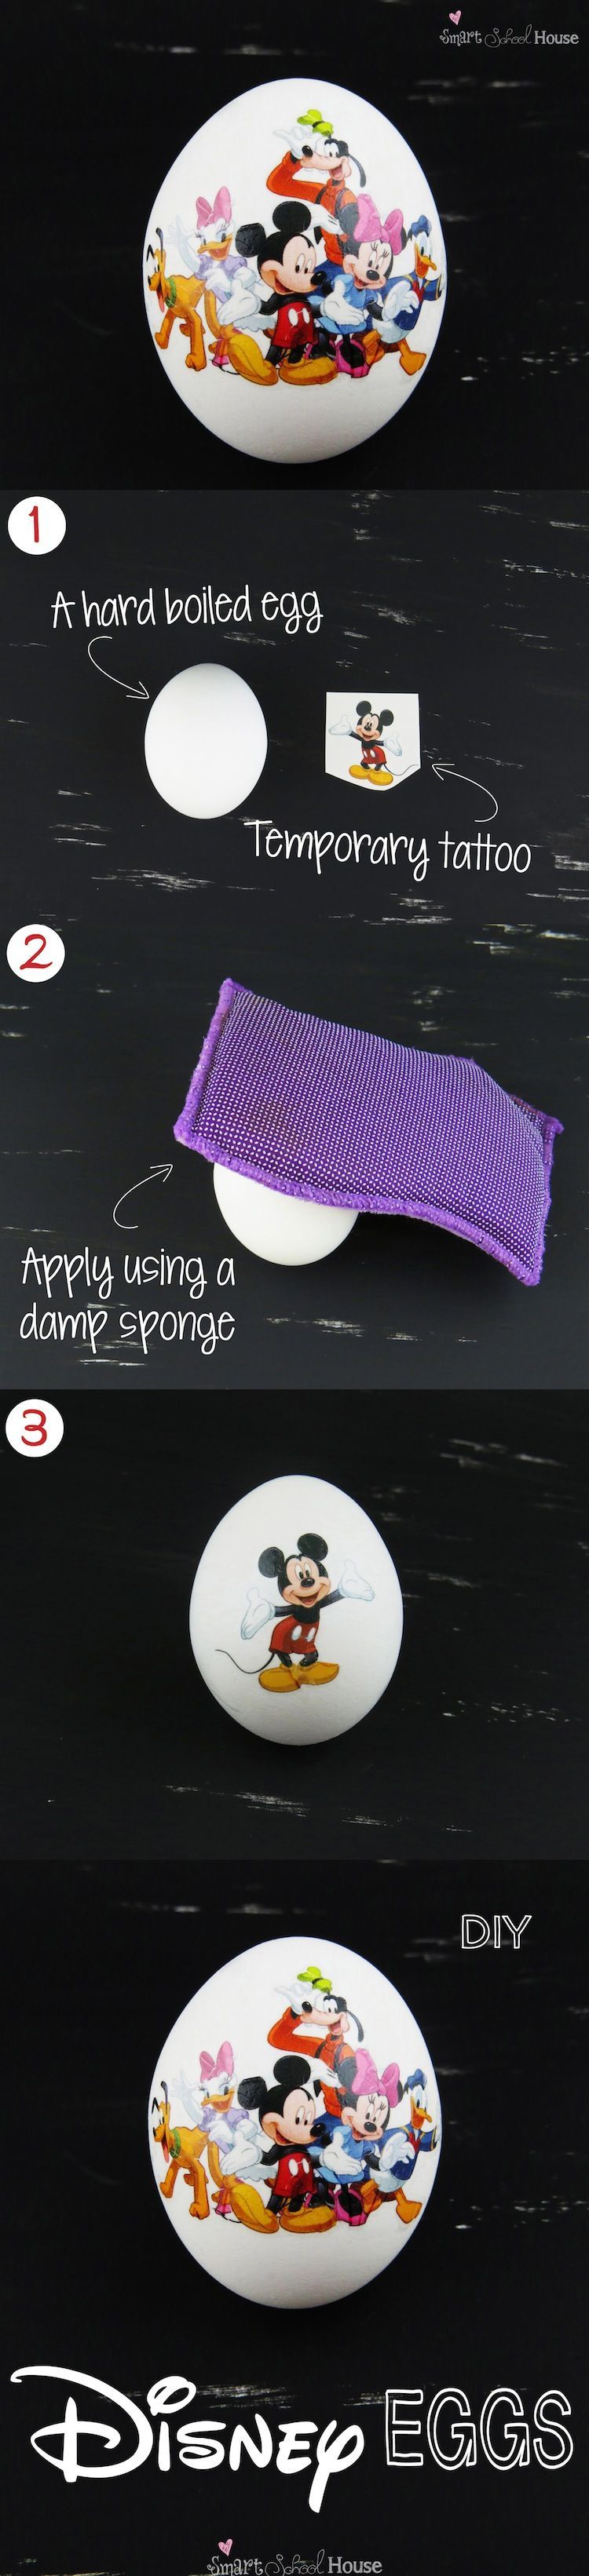 How to make Disney Eggs for Easter! This craft is SO EASY! #Disney